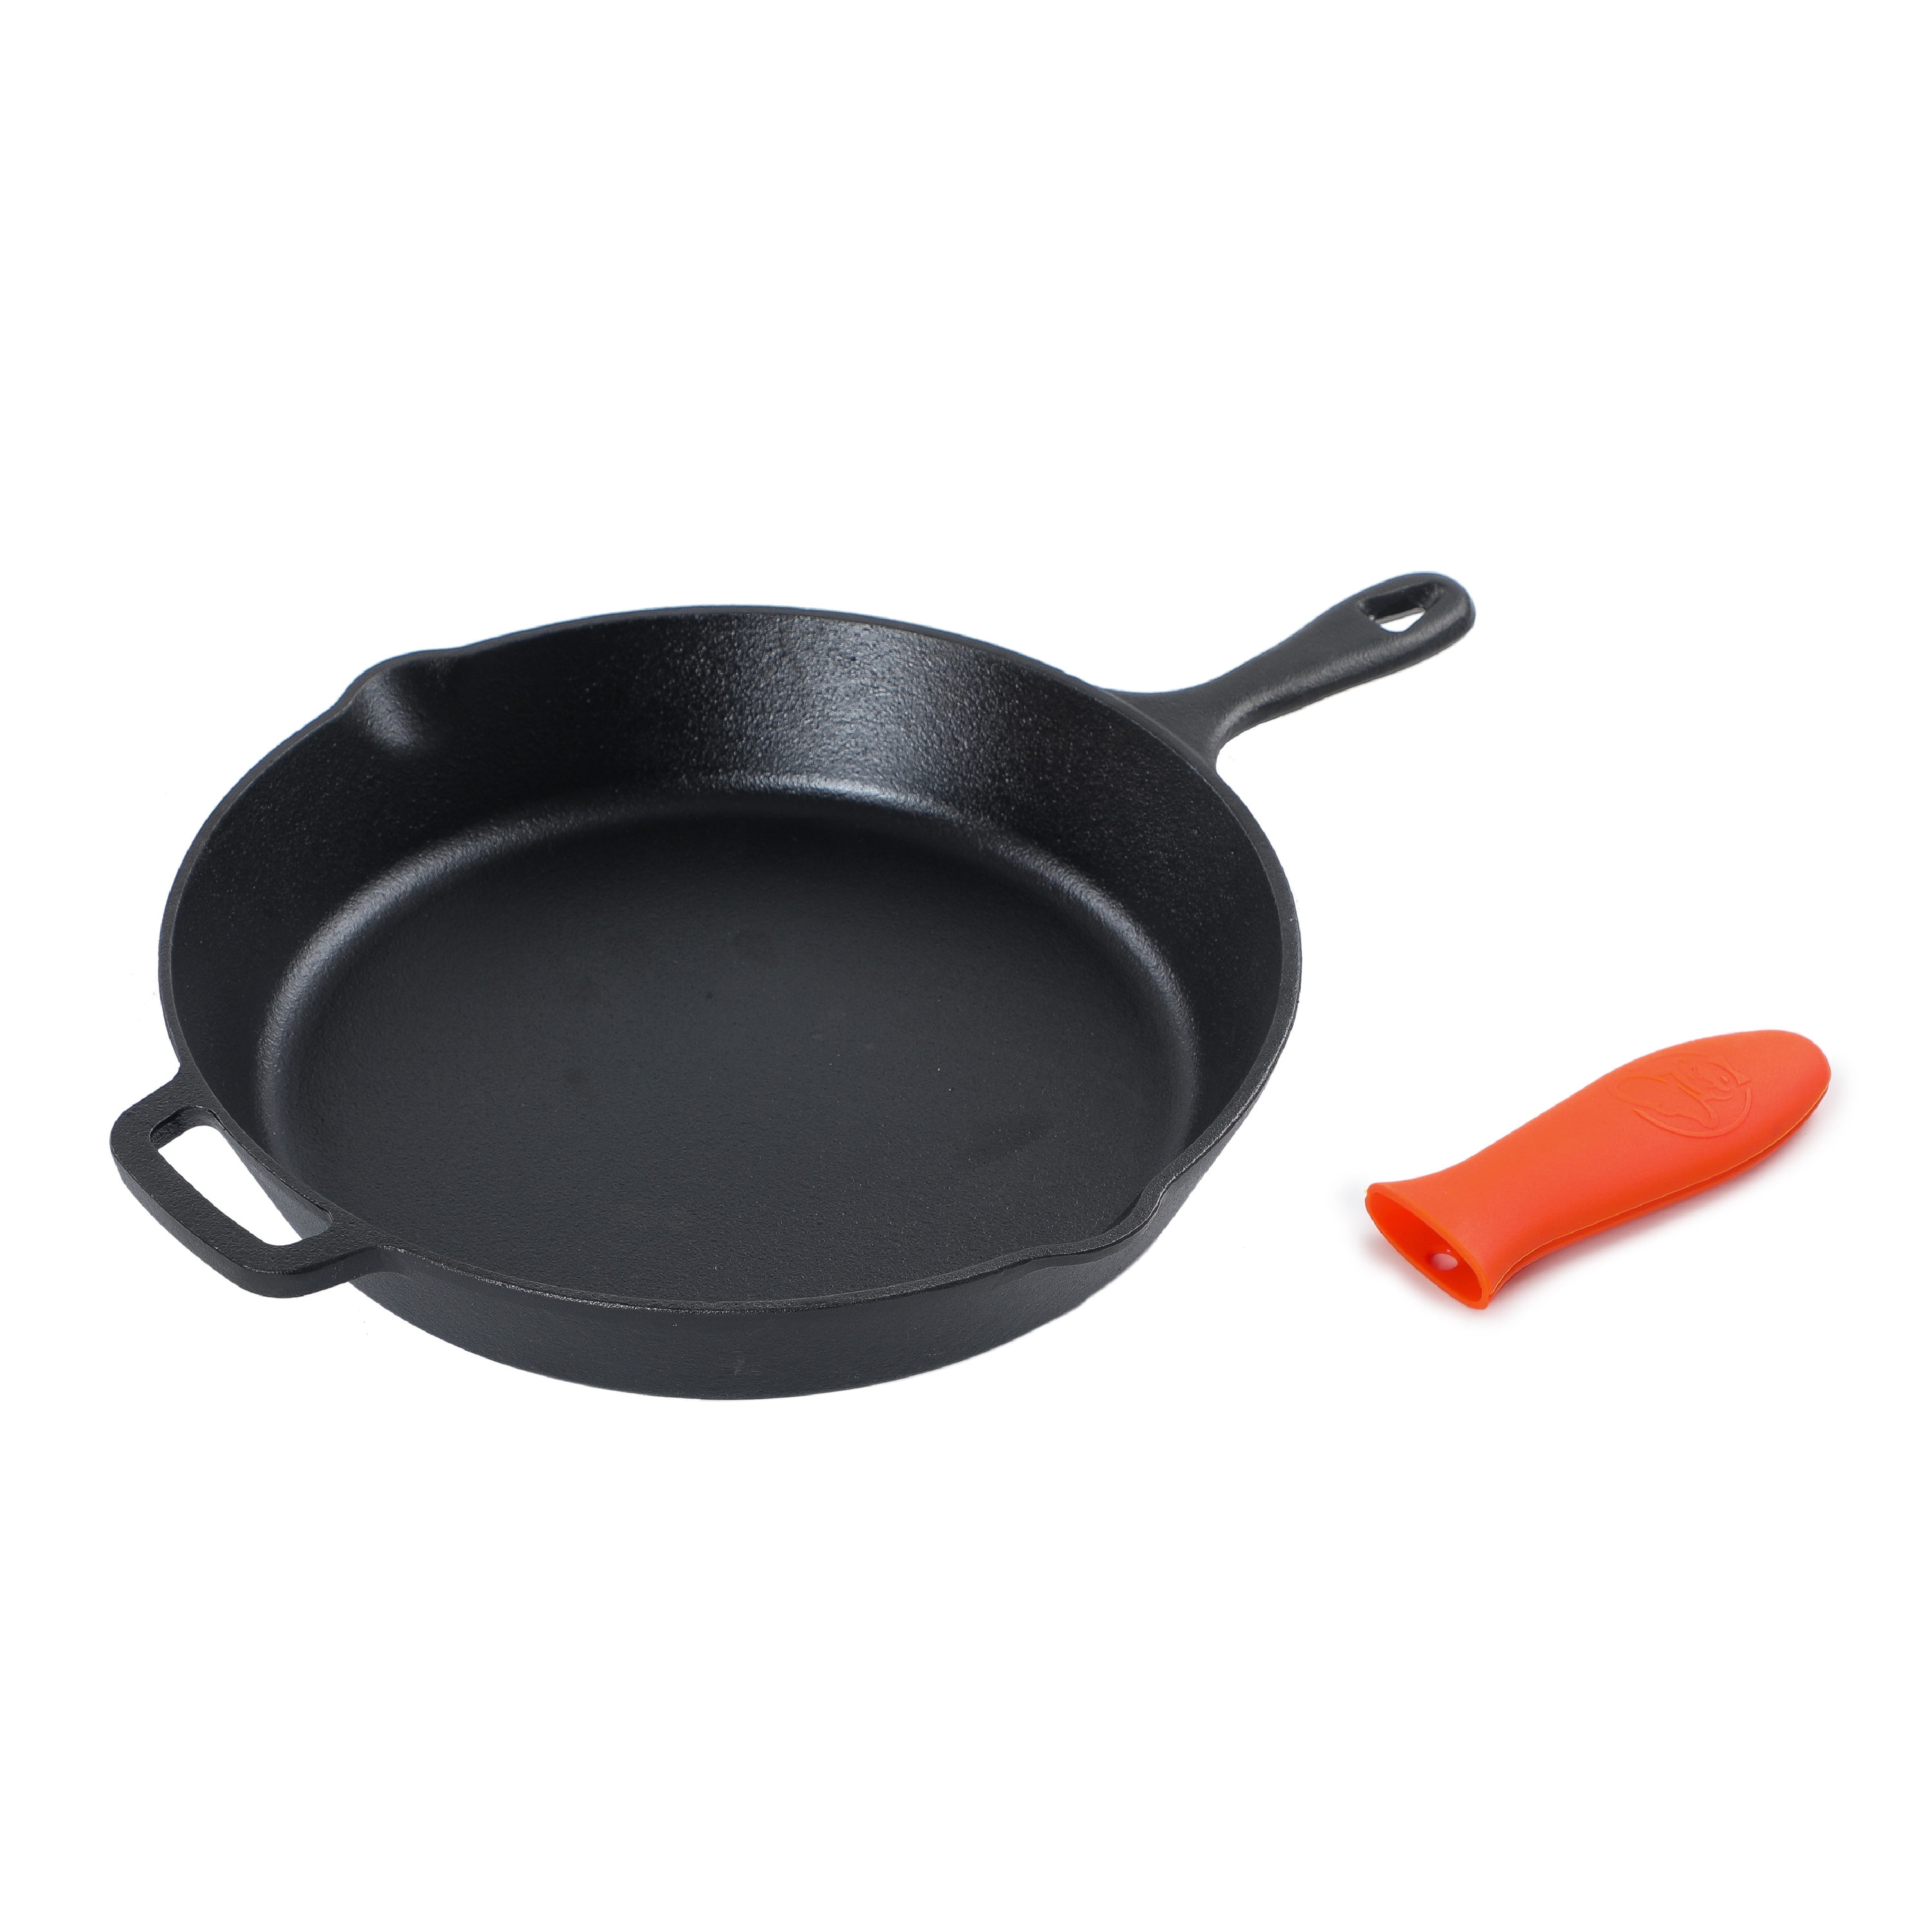  Lodge Seasoned Cast Iron Skillet - 12 Inch Ergonomic Frying Pan  with Assist Handle, black: Cast Iron Skillet: Home & Kitchen